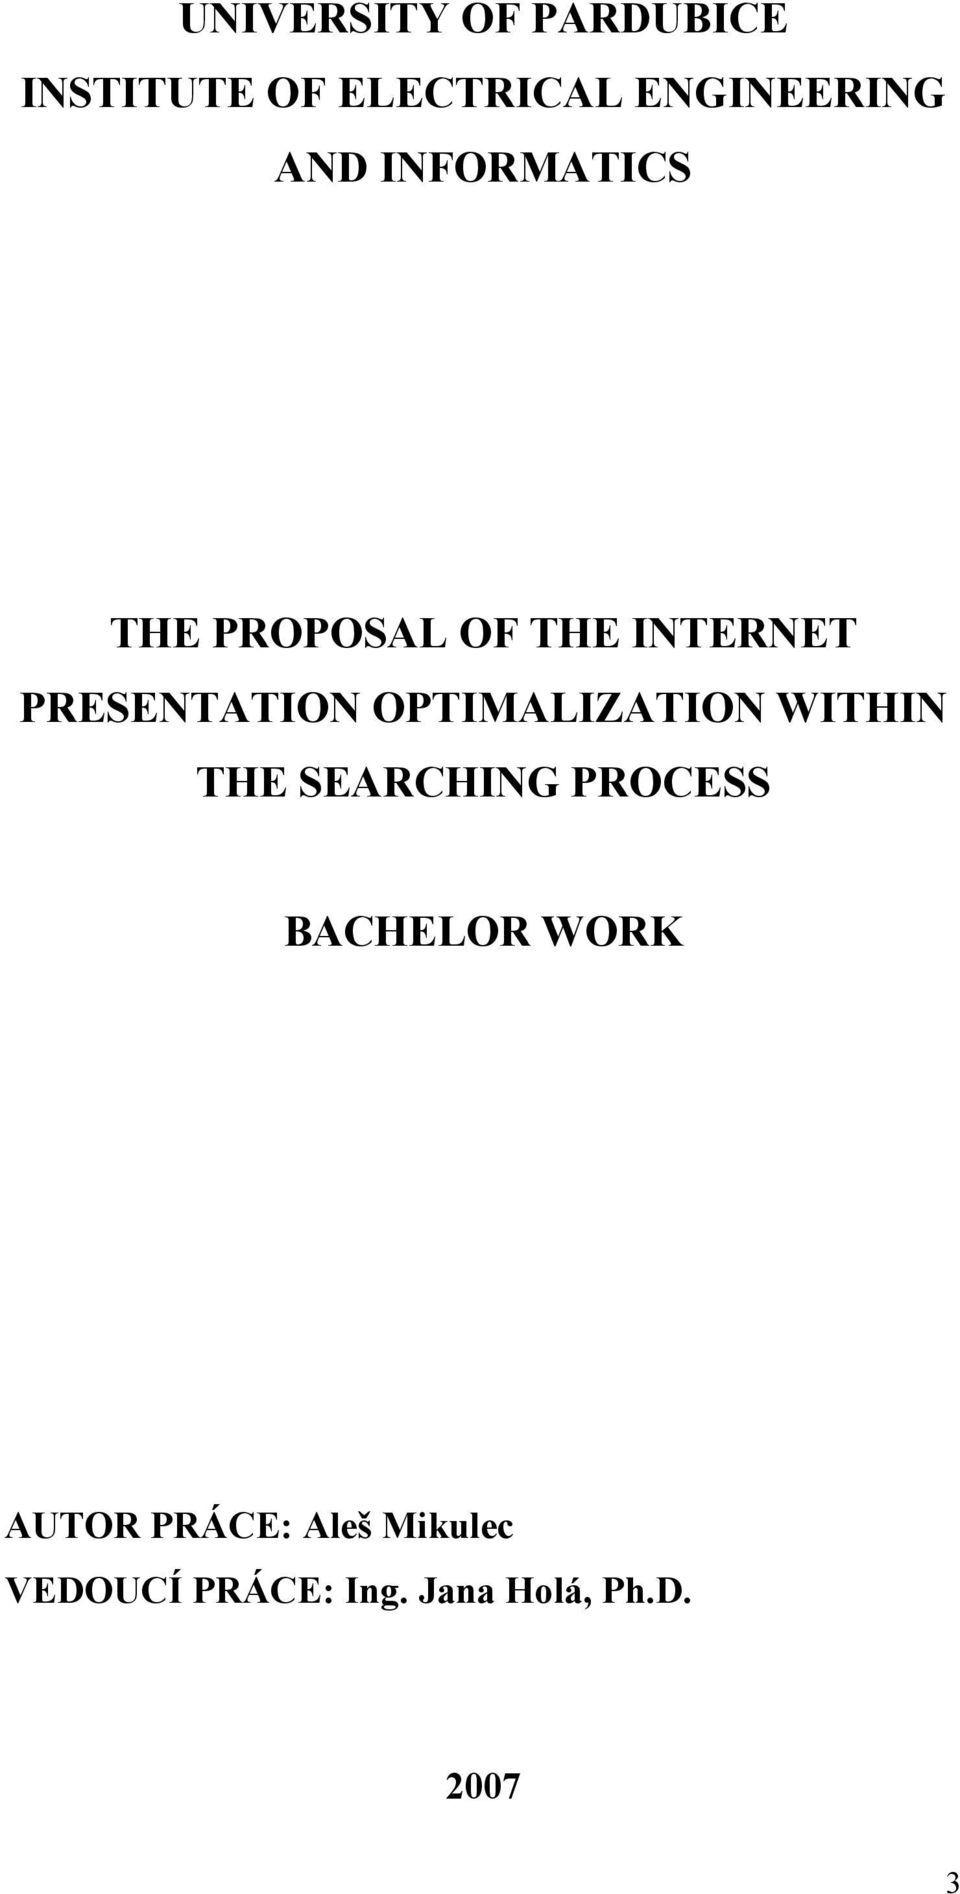 OPTIMALIZATION WITHIN THE SEARCHING PROCESS BACHELOR WORK